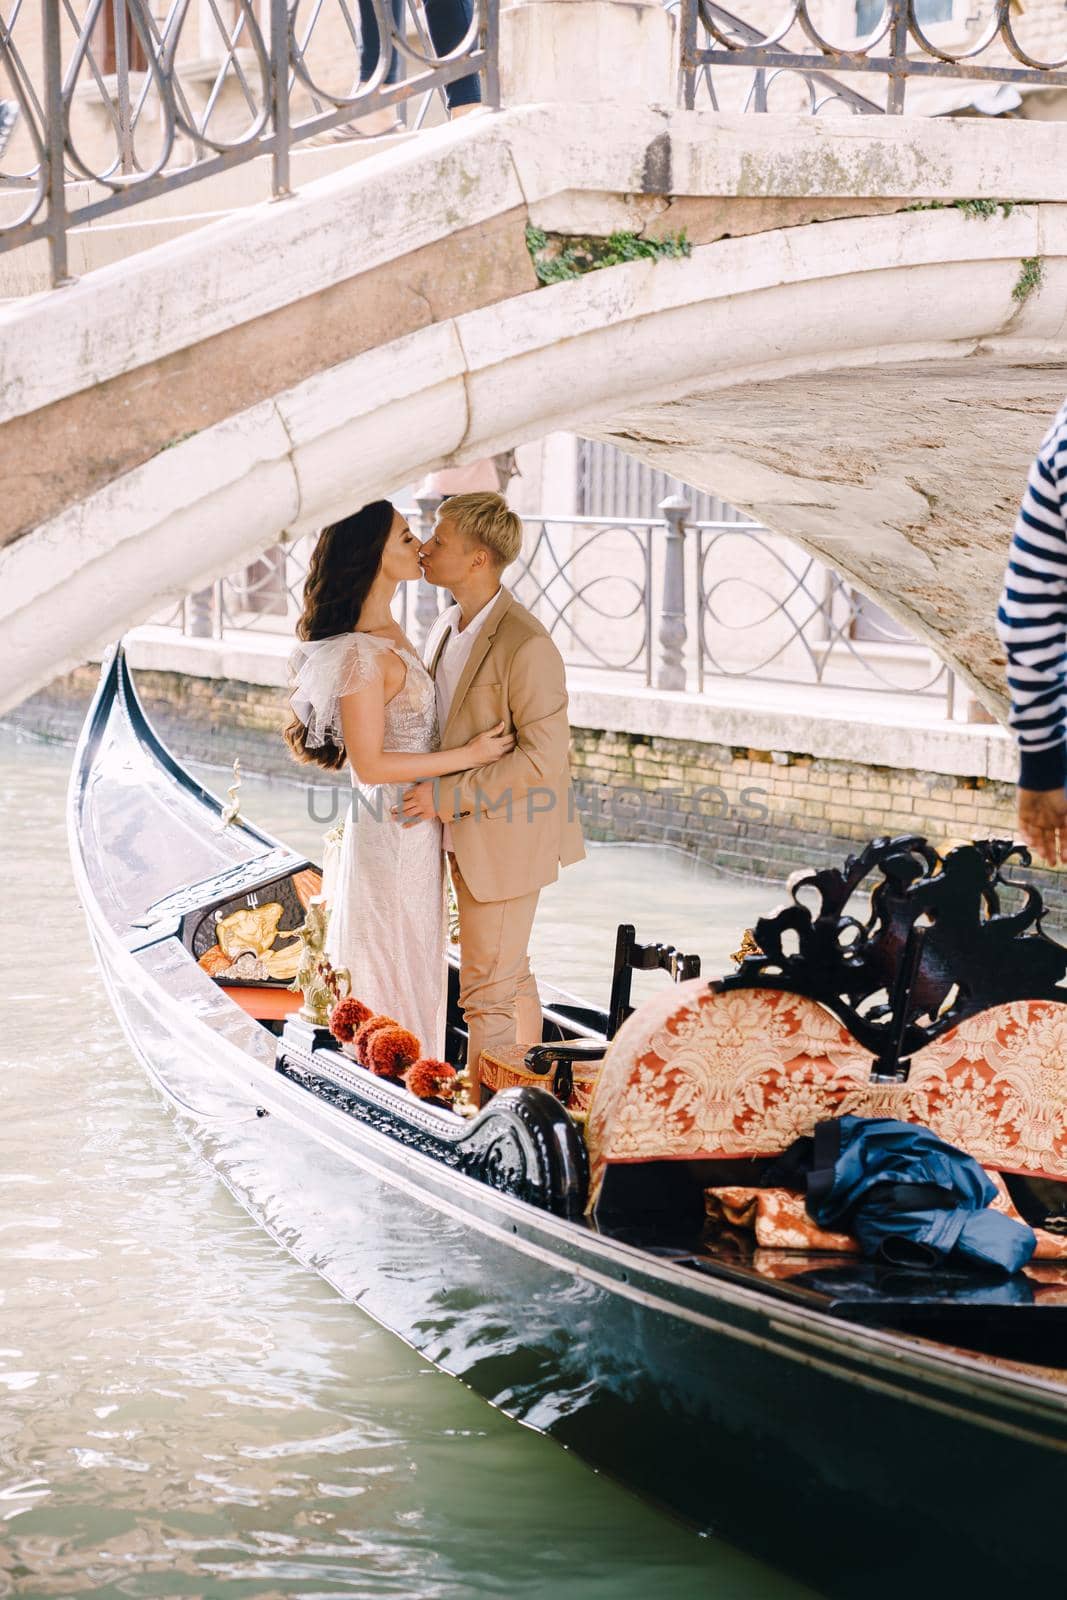 The gondolier rides the bride and groom in a classic wooden gondola along a narrow Venetian canal. The gondola floats under a stone bridge, the newlyweds kiss.